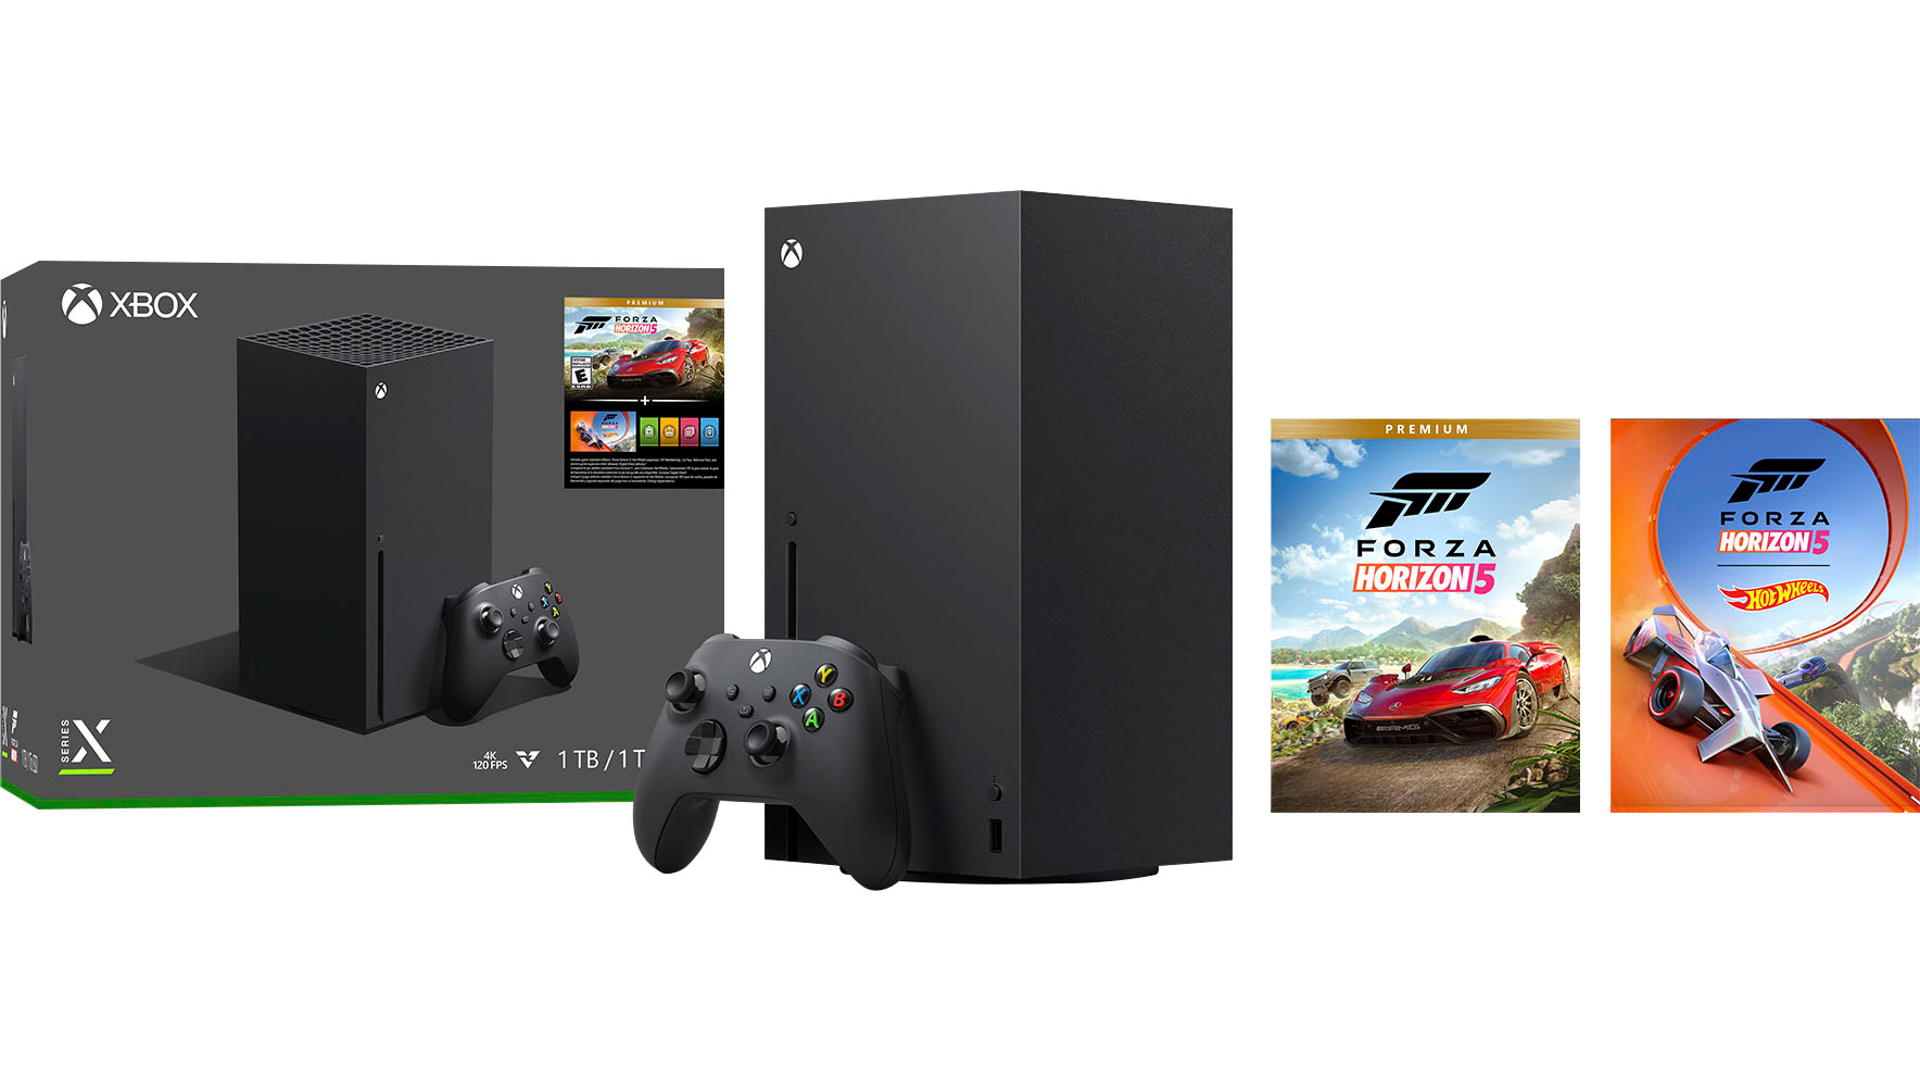 Buy this Xbox Series X, get all of Mexico for free